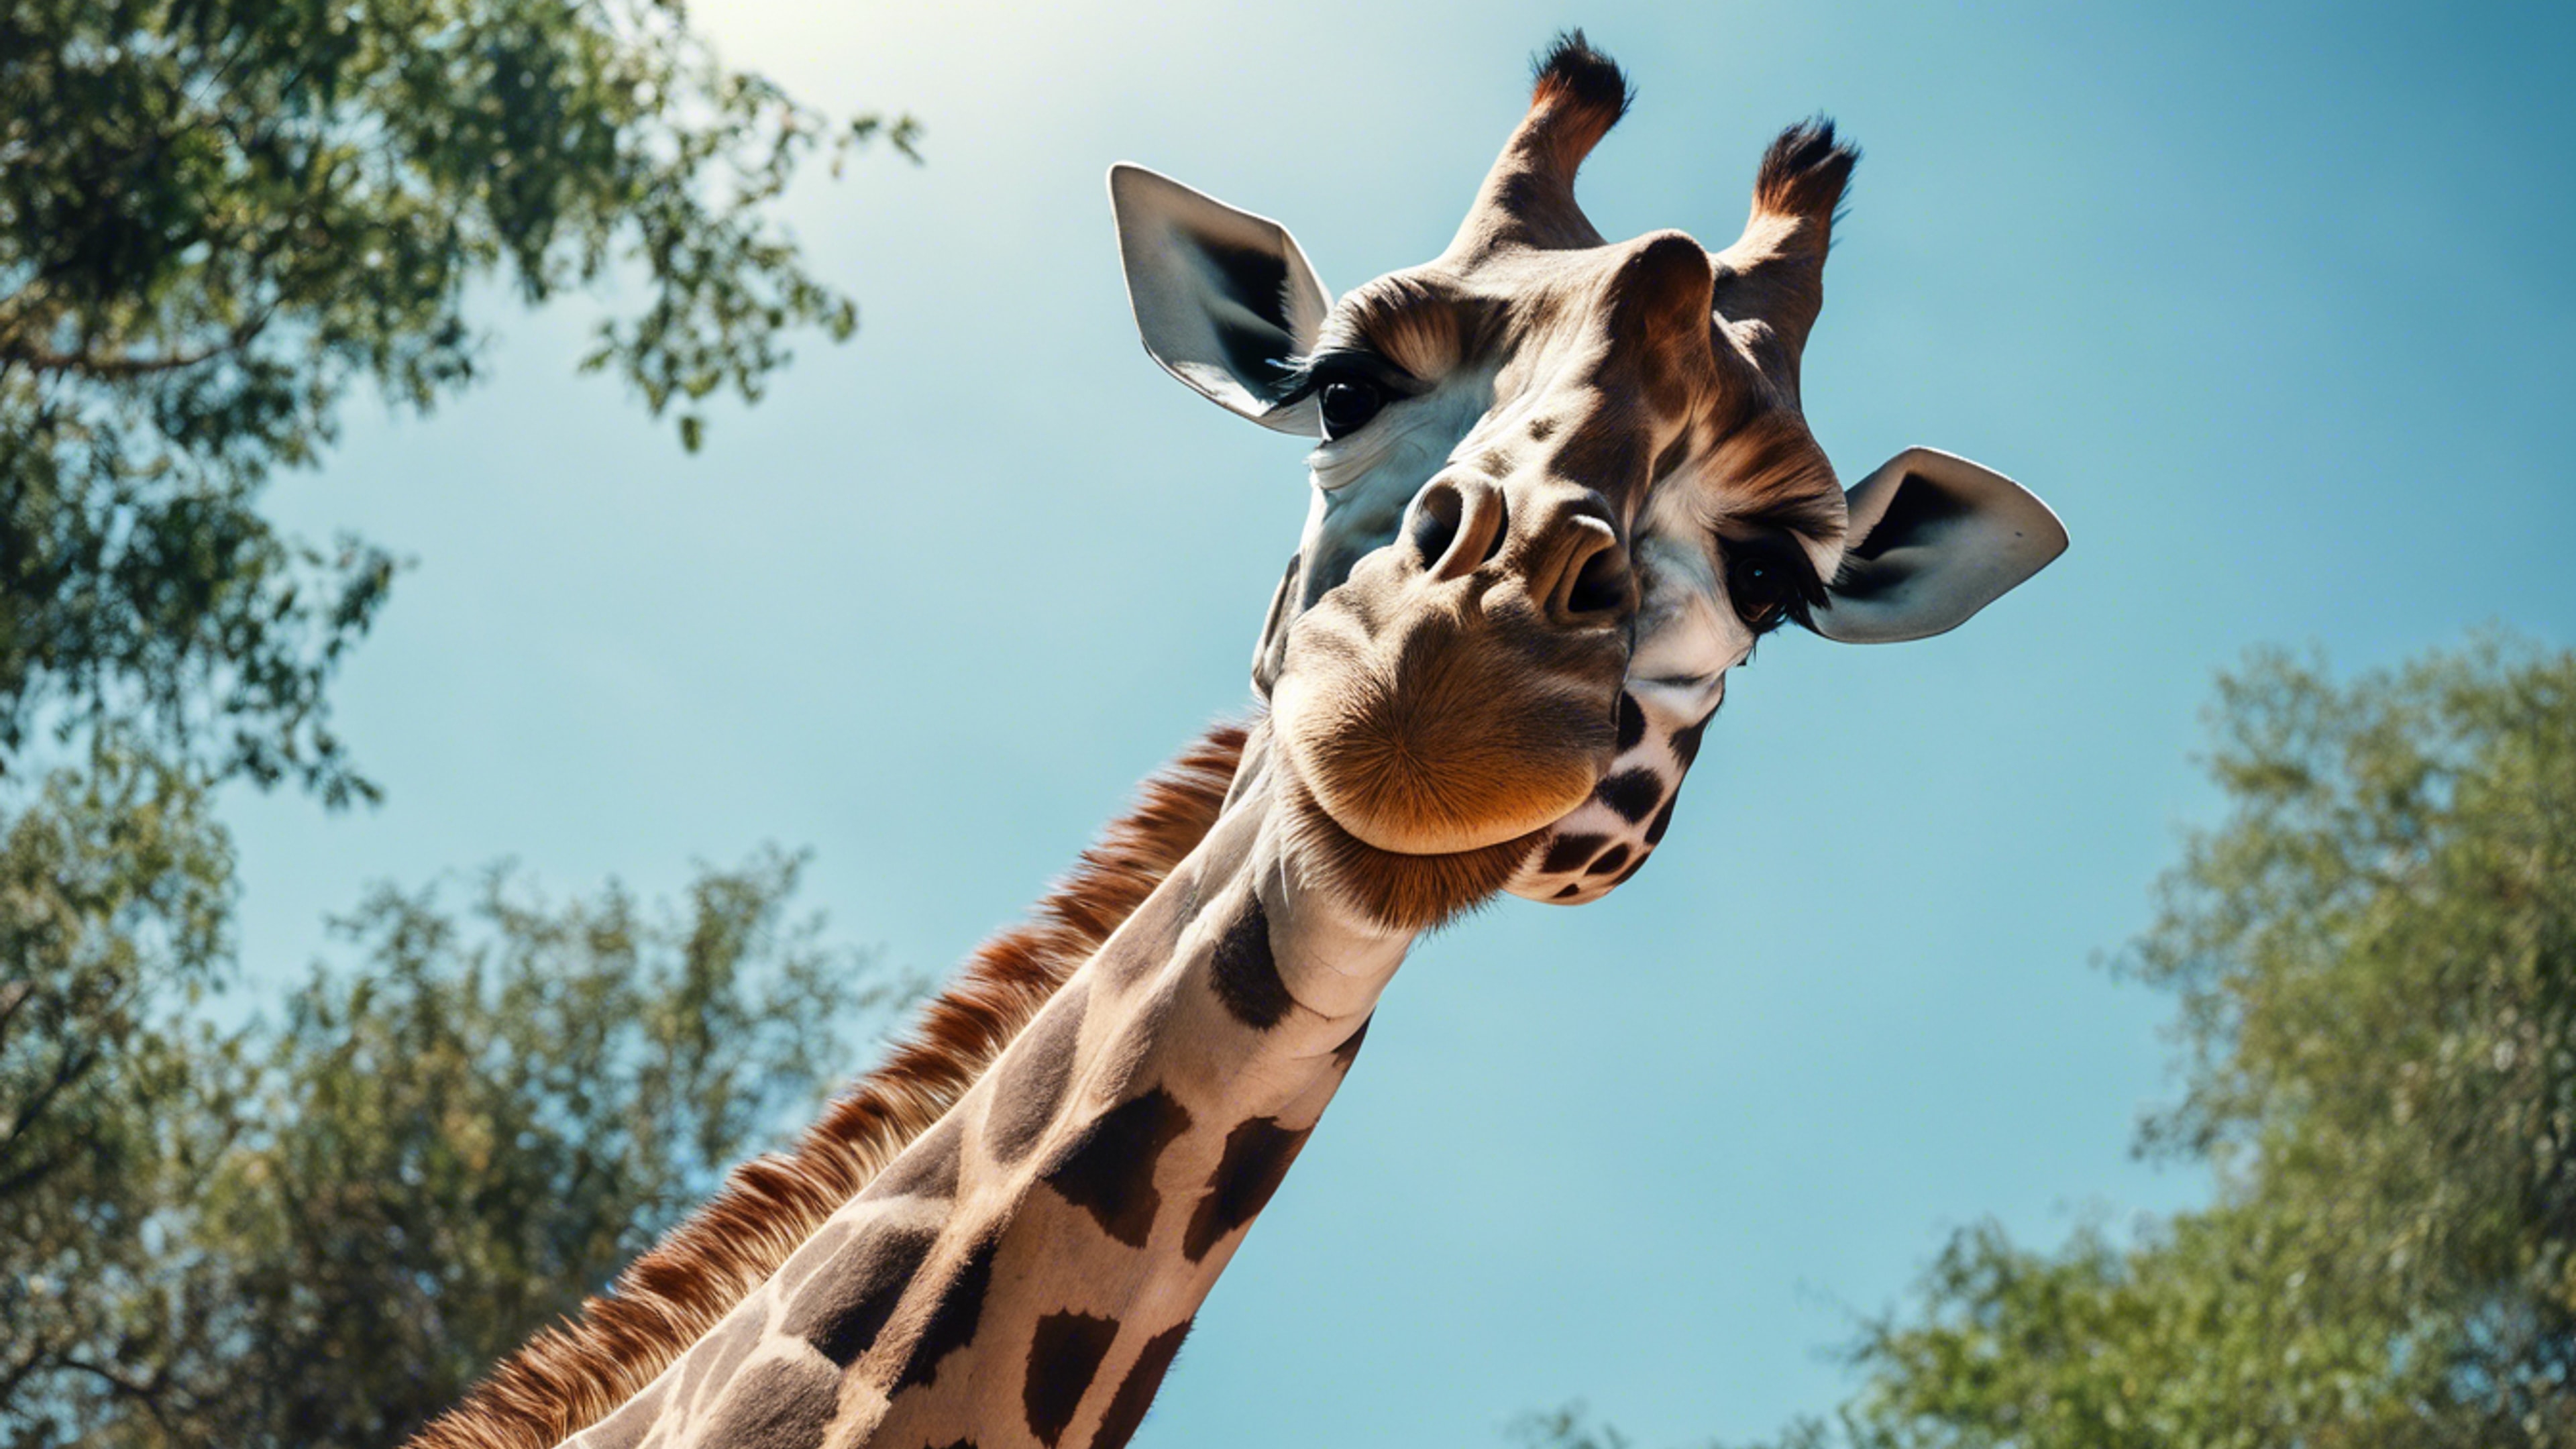 A picture from a below angle showing the towering magnificence of a giraffe against a clear blue sky. Fondo de pantalla[8a88956d9aa2483bb204]